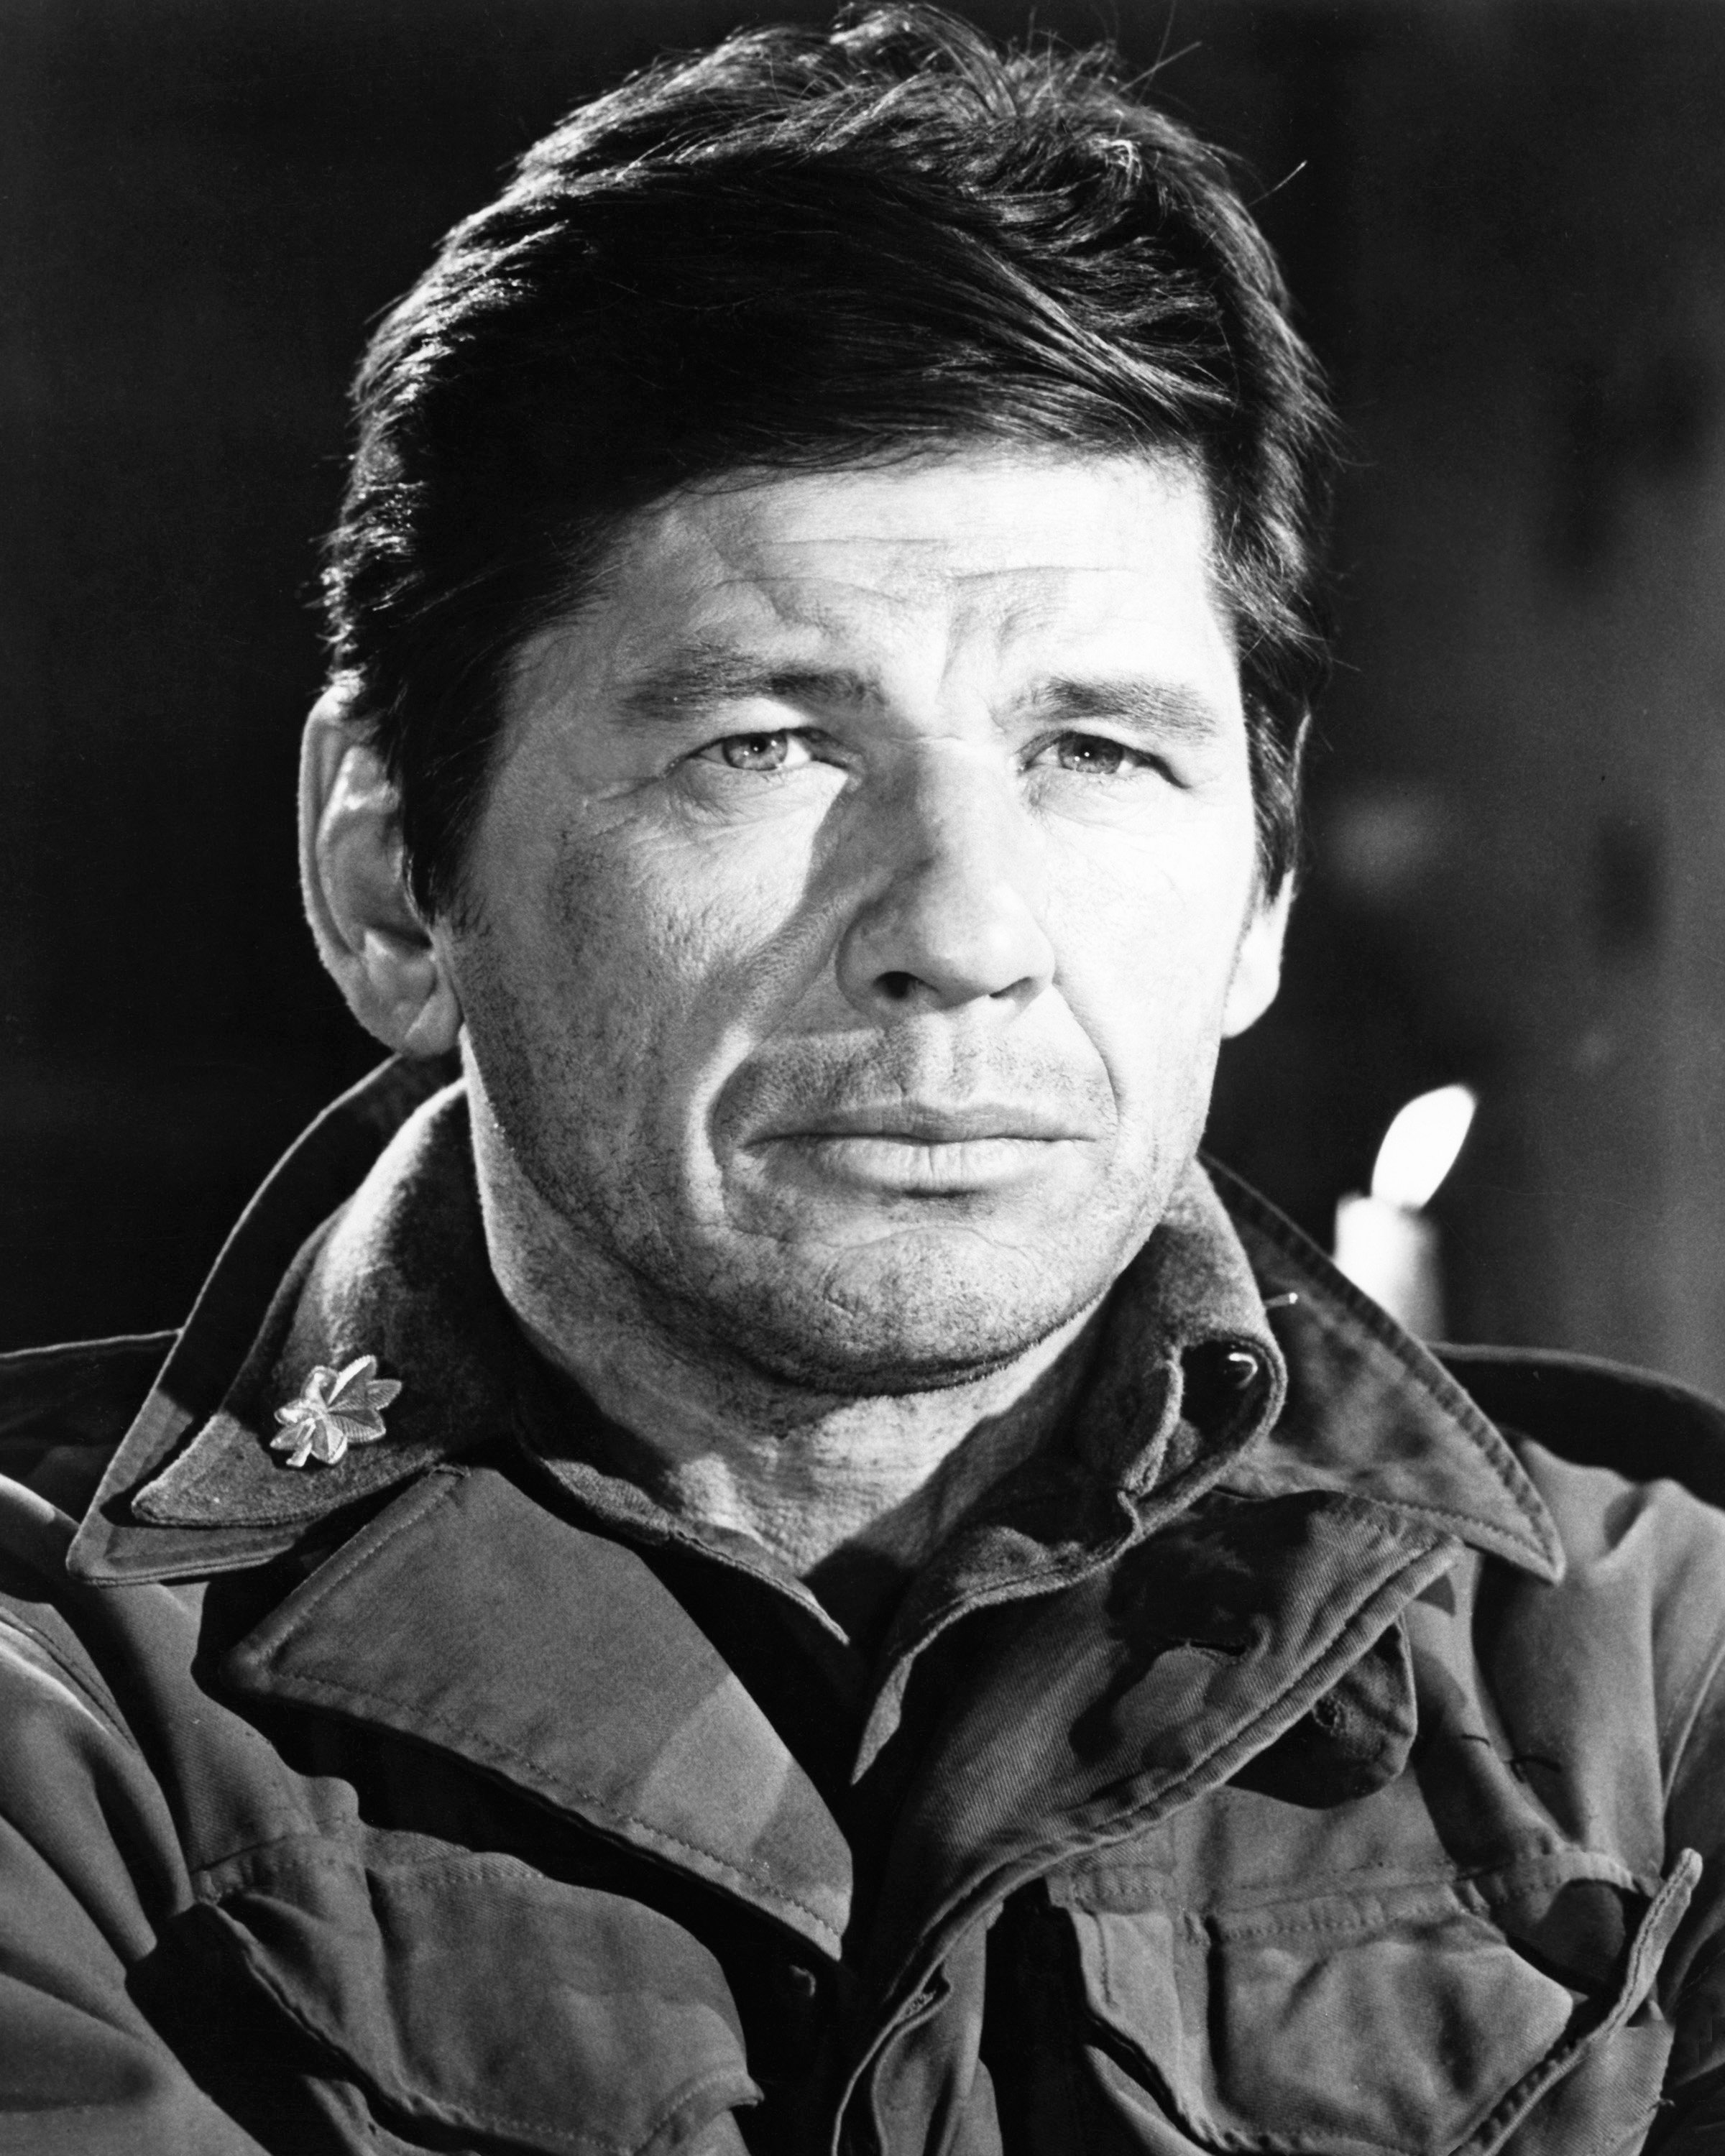 Charles Bronson as Joseph Wladislaw in the film "The Dirty Dozen," in 1967. / Source: Getty Images